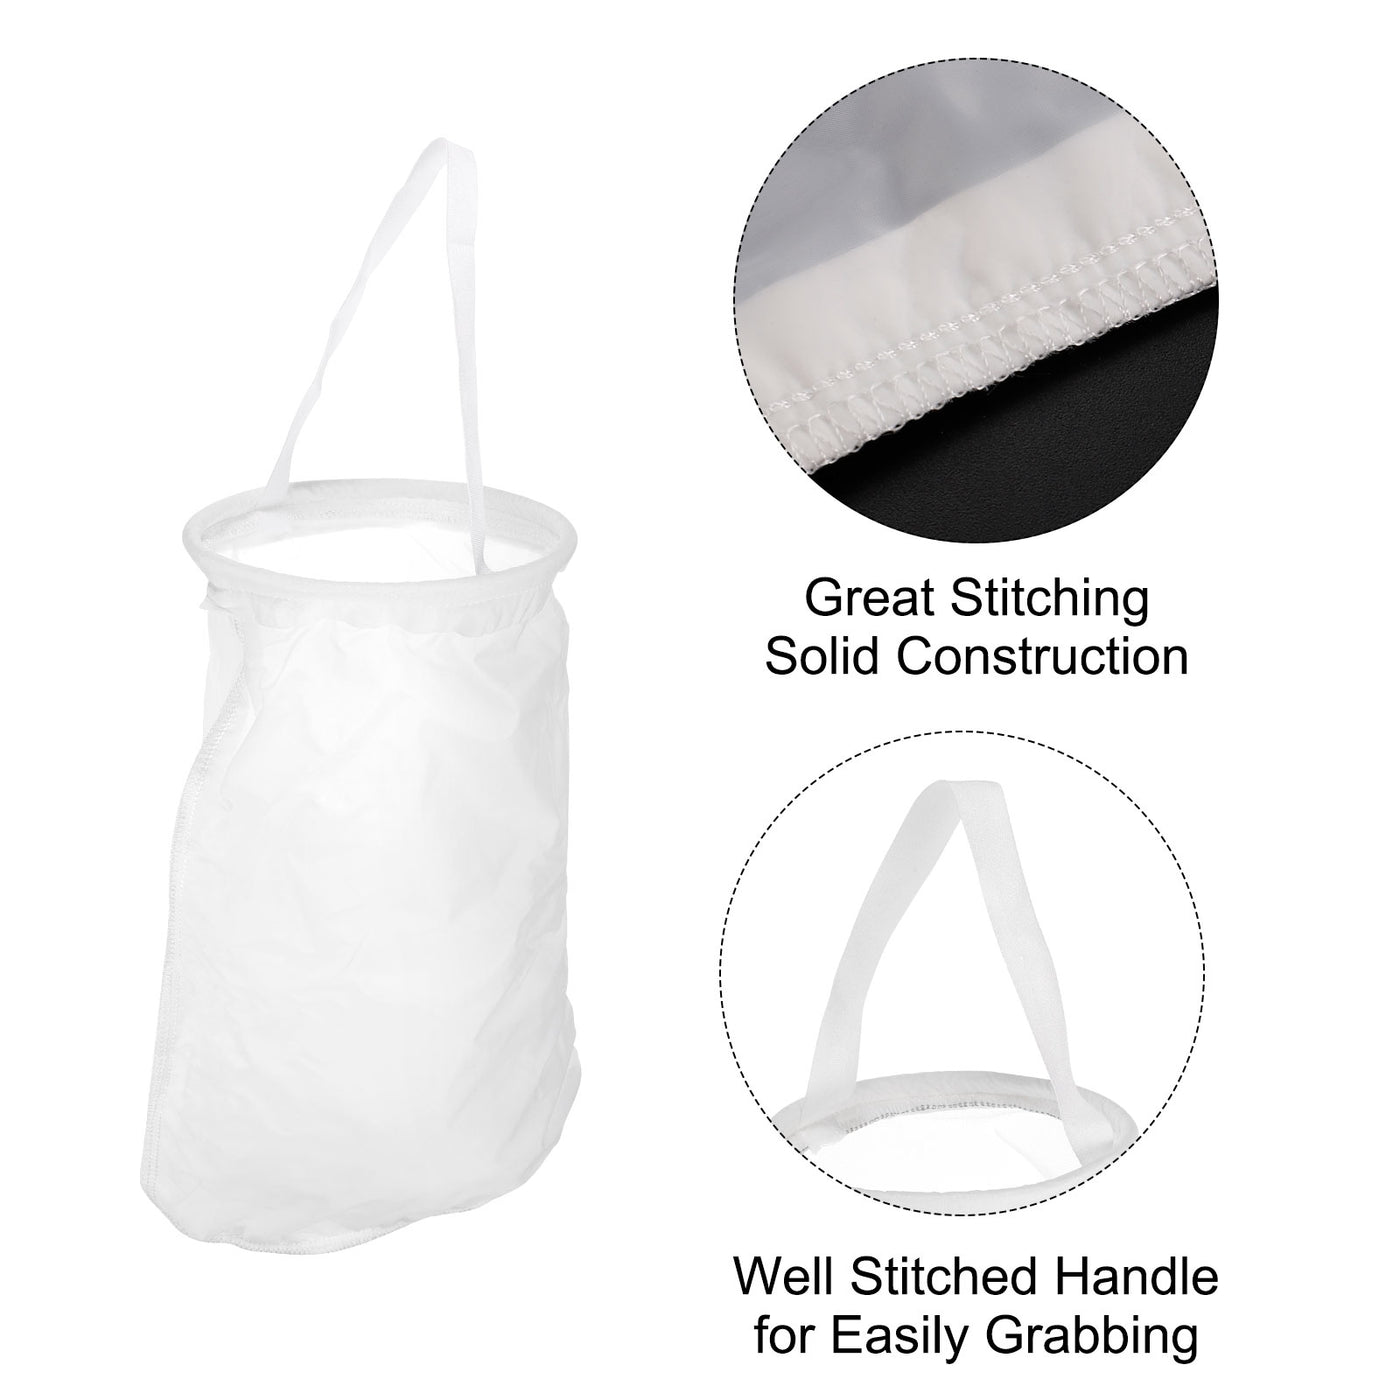 uxcell Uxcell Paint Filter Bag 300 Mesh (16.9"x7") Nylon Strainer for Filtering Paint